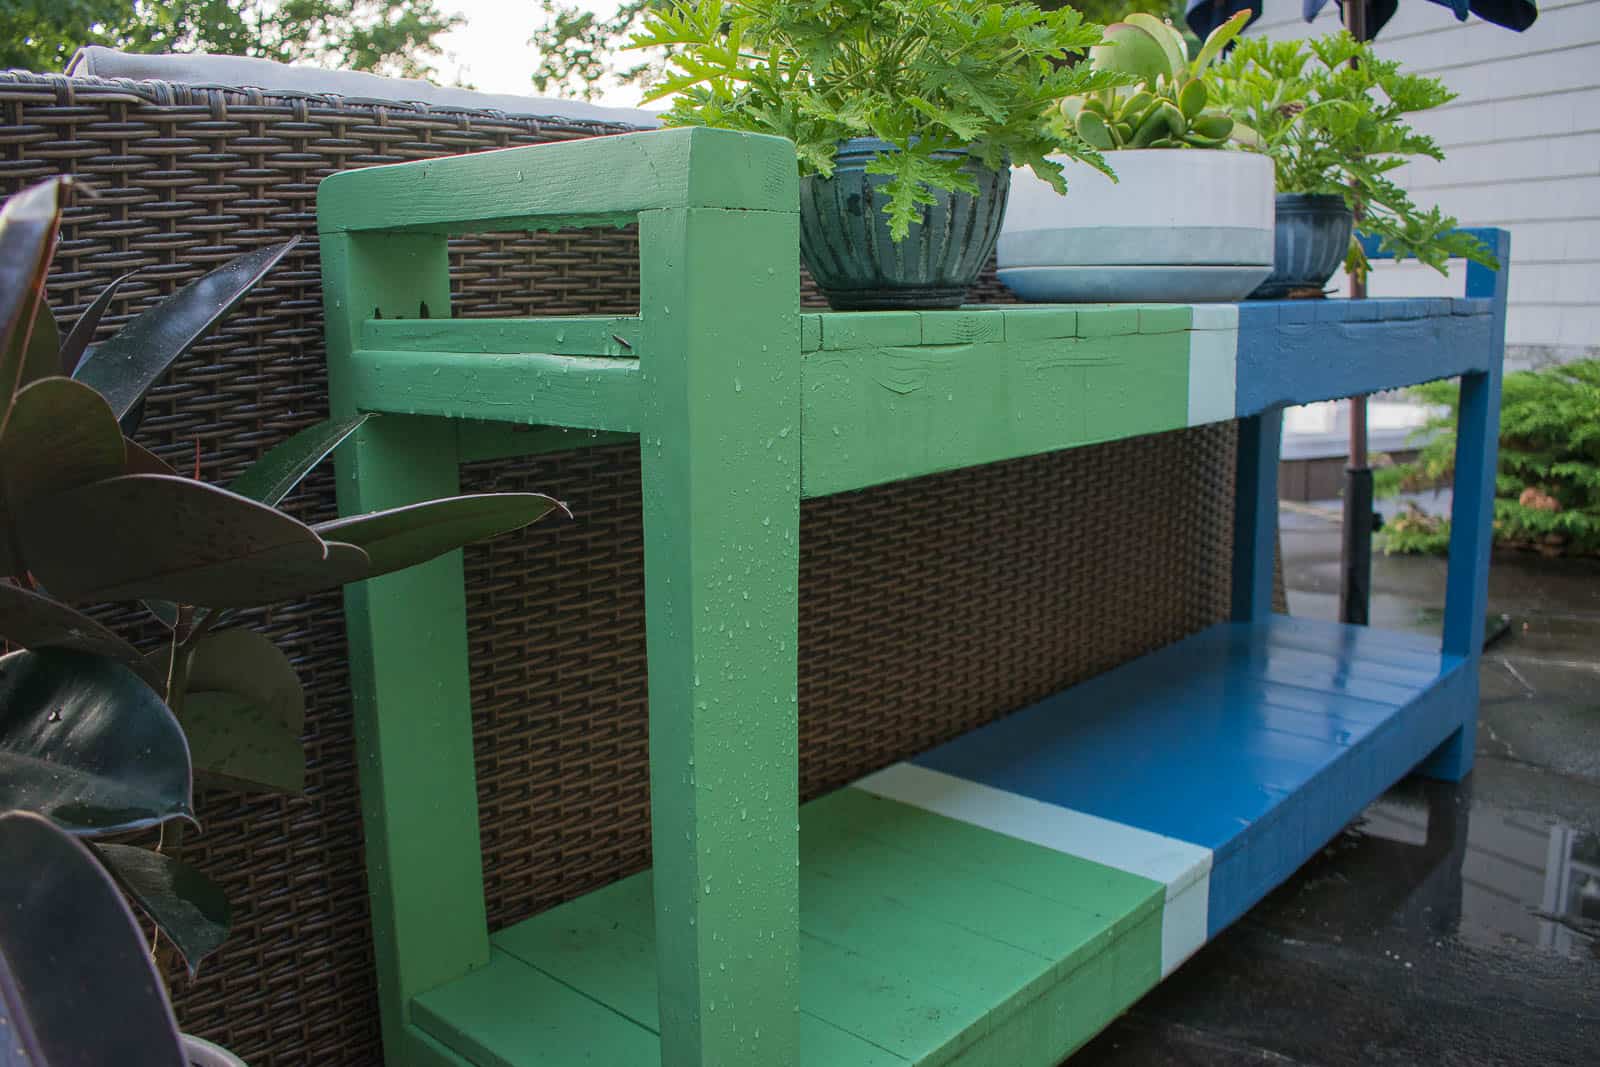 painted outdoor furniture